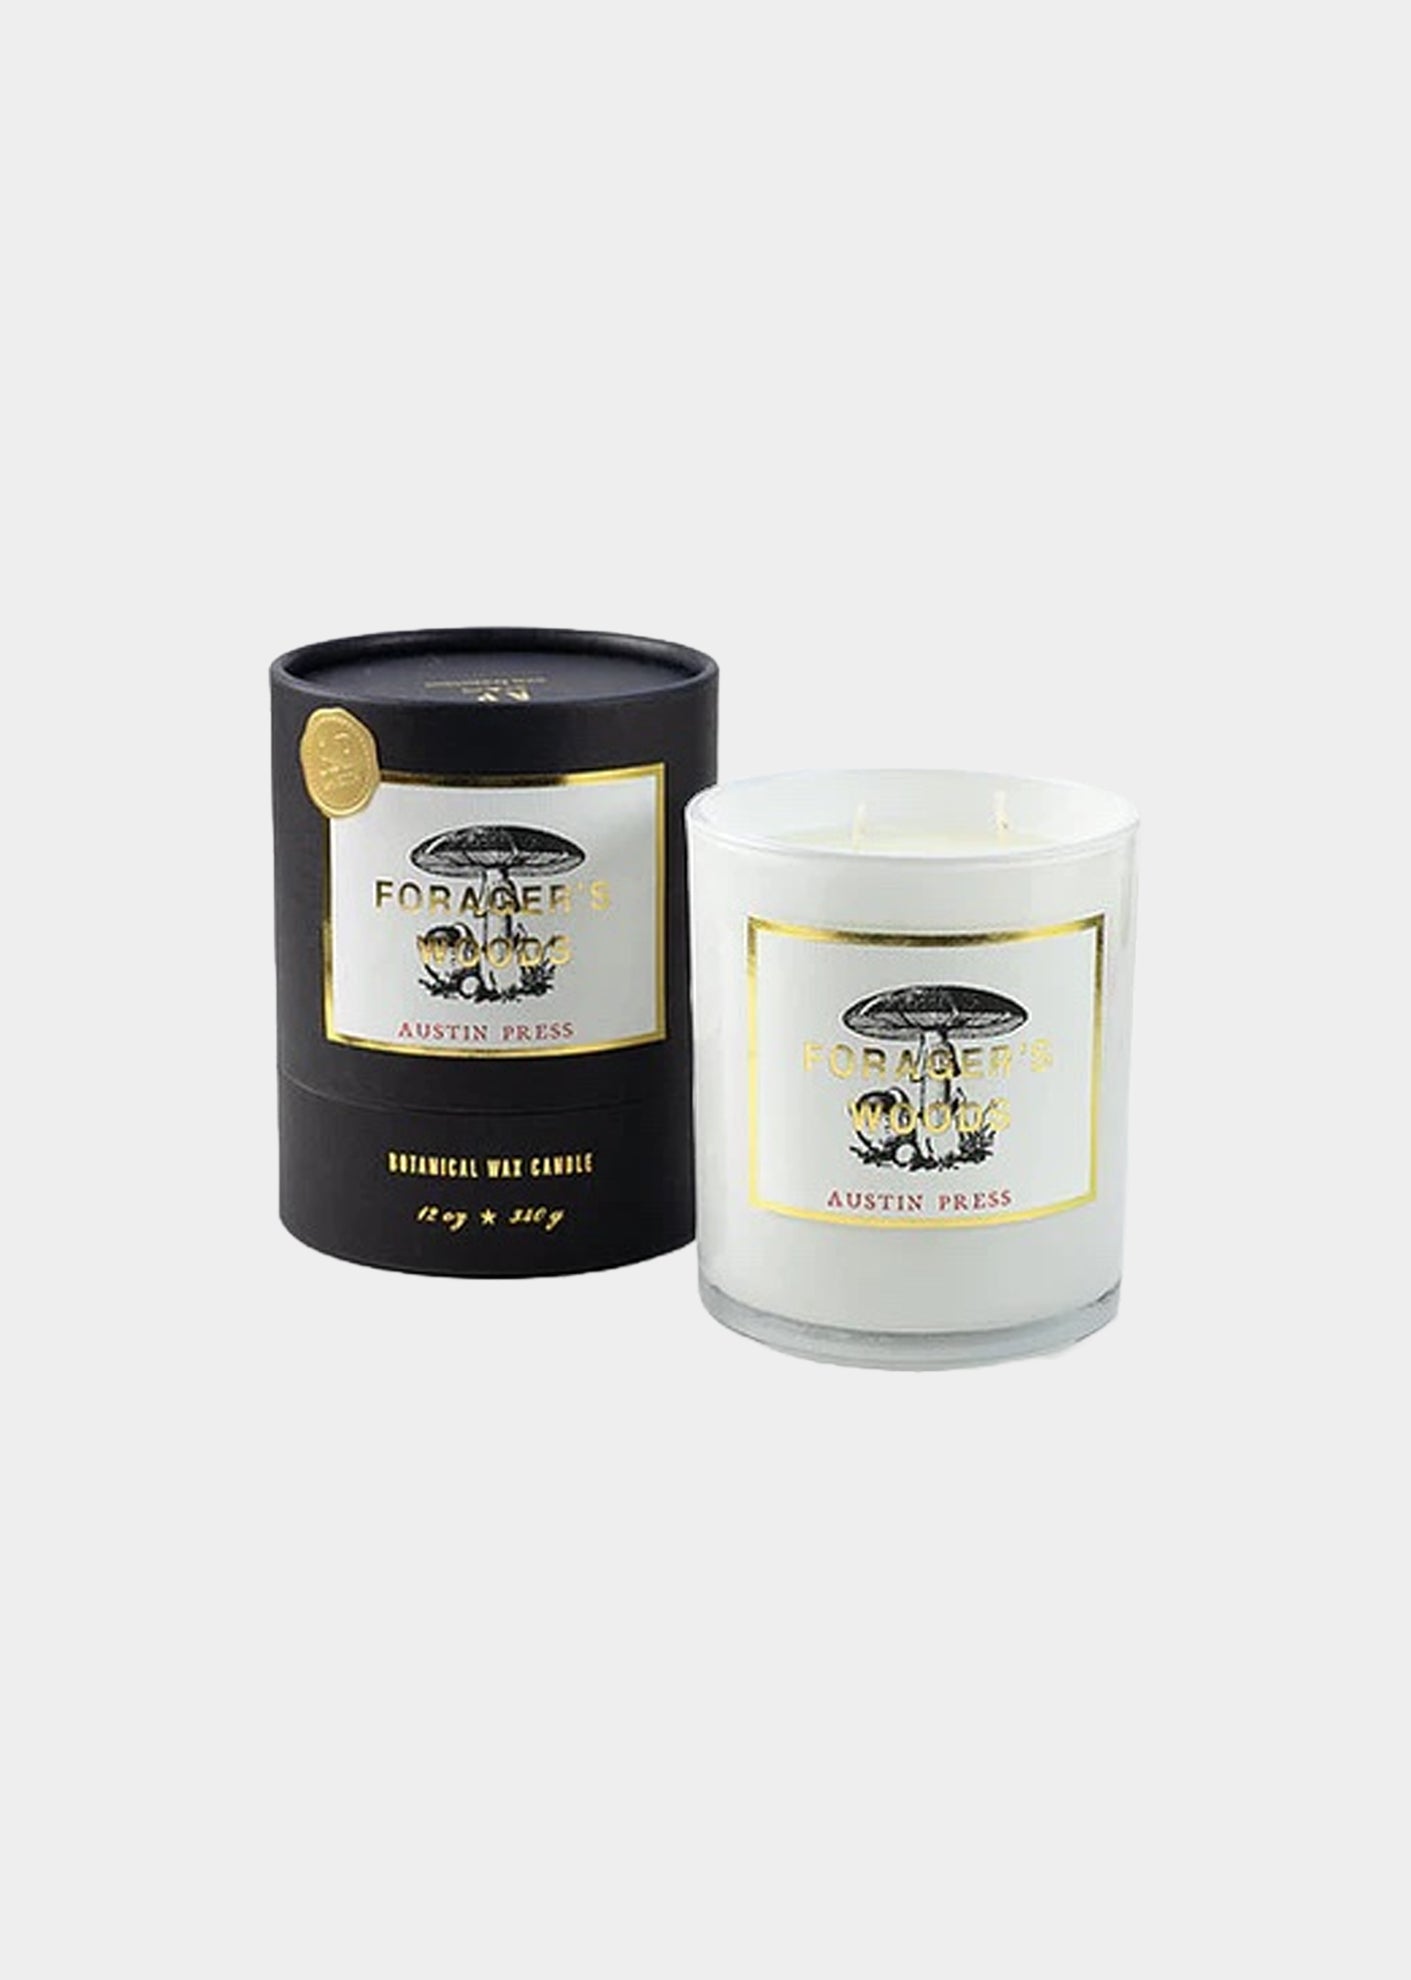 AUSTIN PRESS CANDLE - FORAGERS WOOD